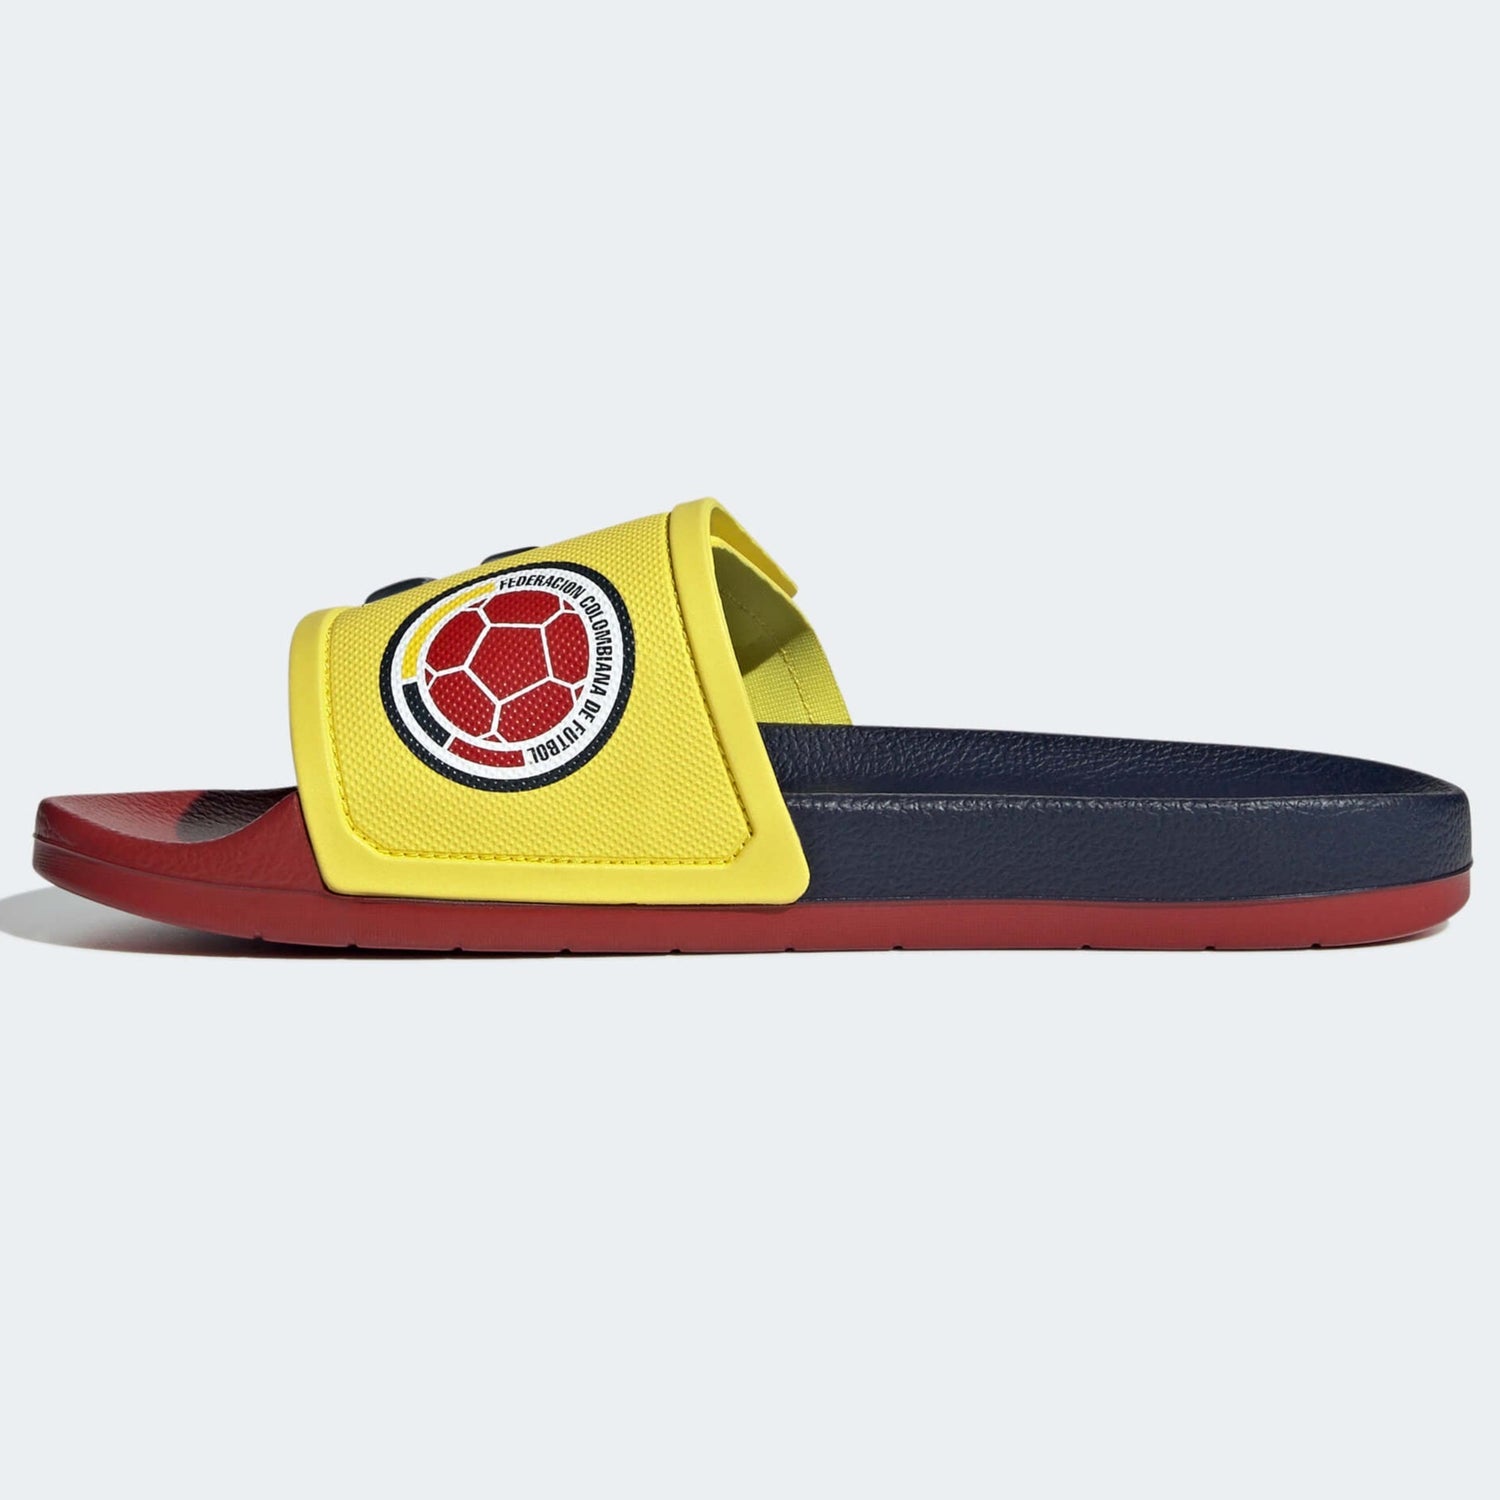 adidas Colombia Adilette TND Slides - Yellow-Red-Navy (Side 2)